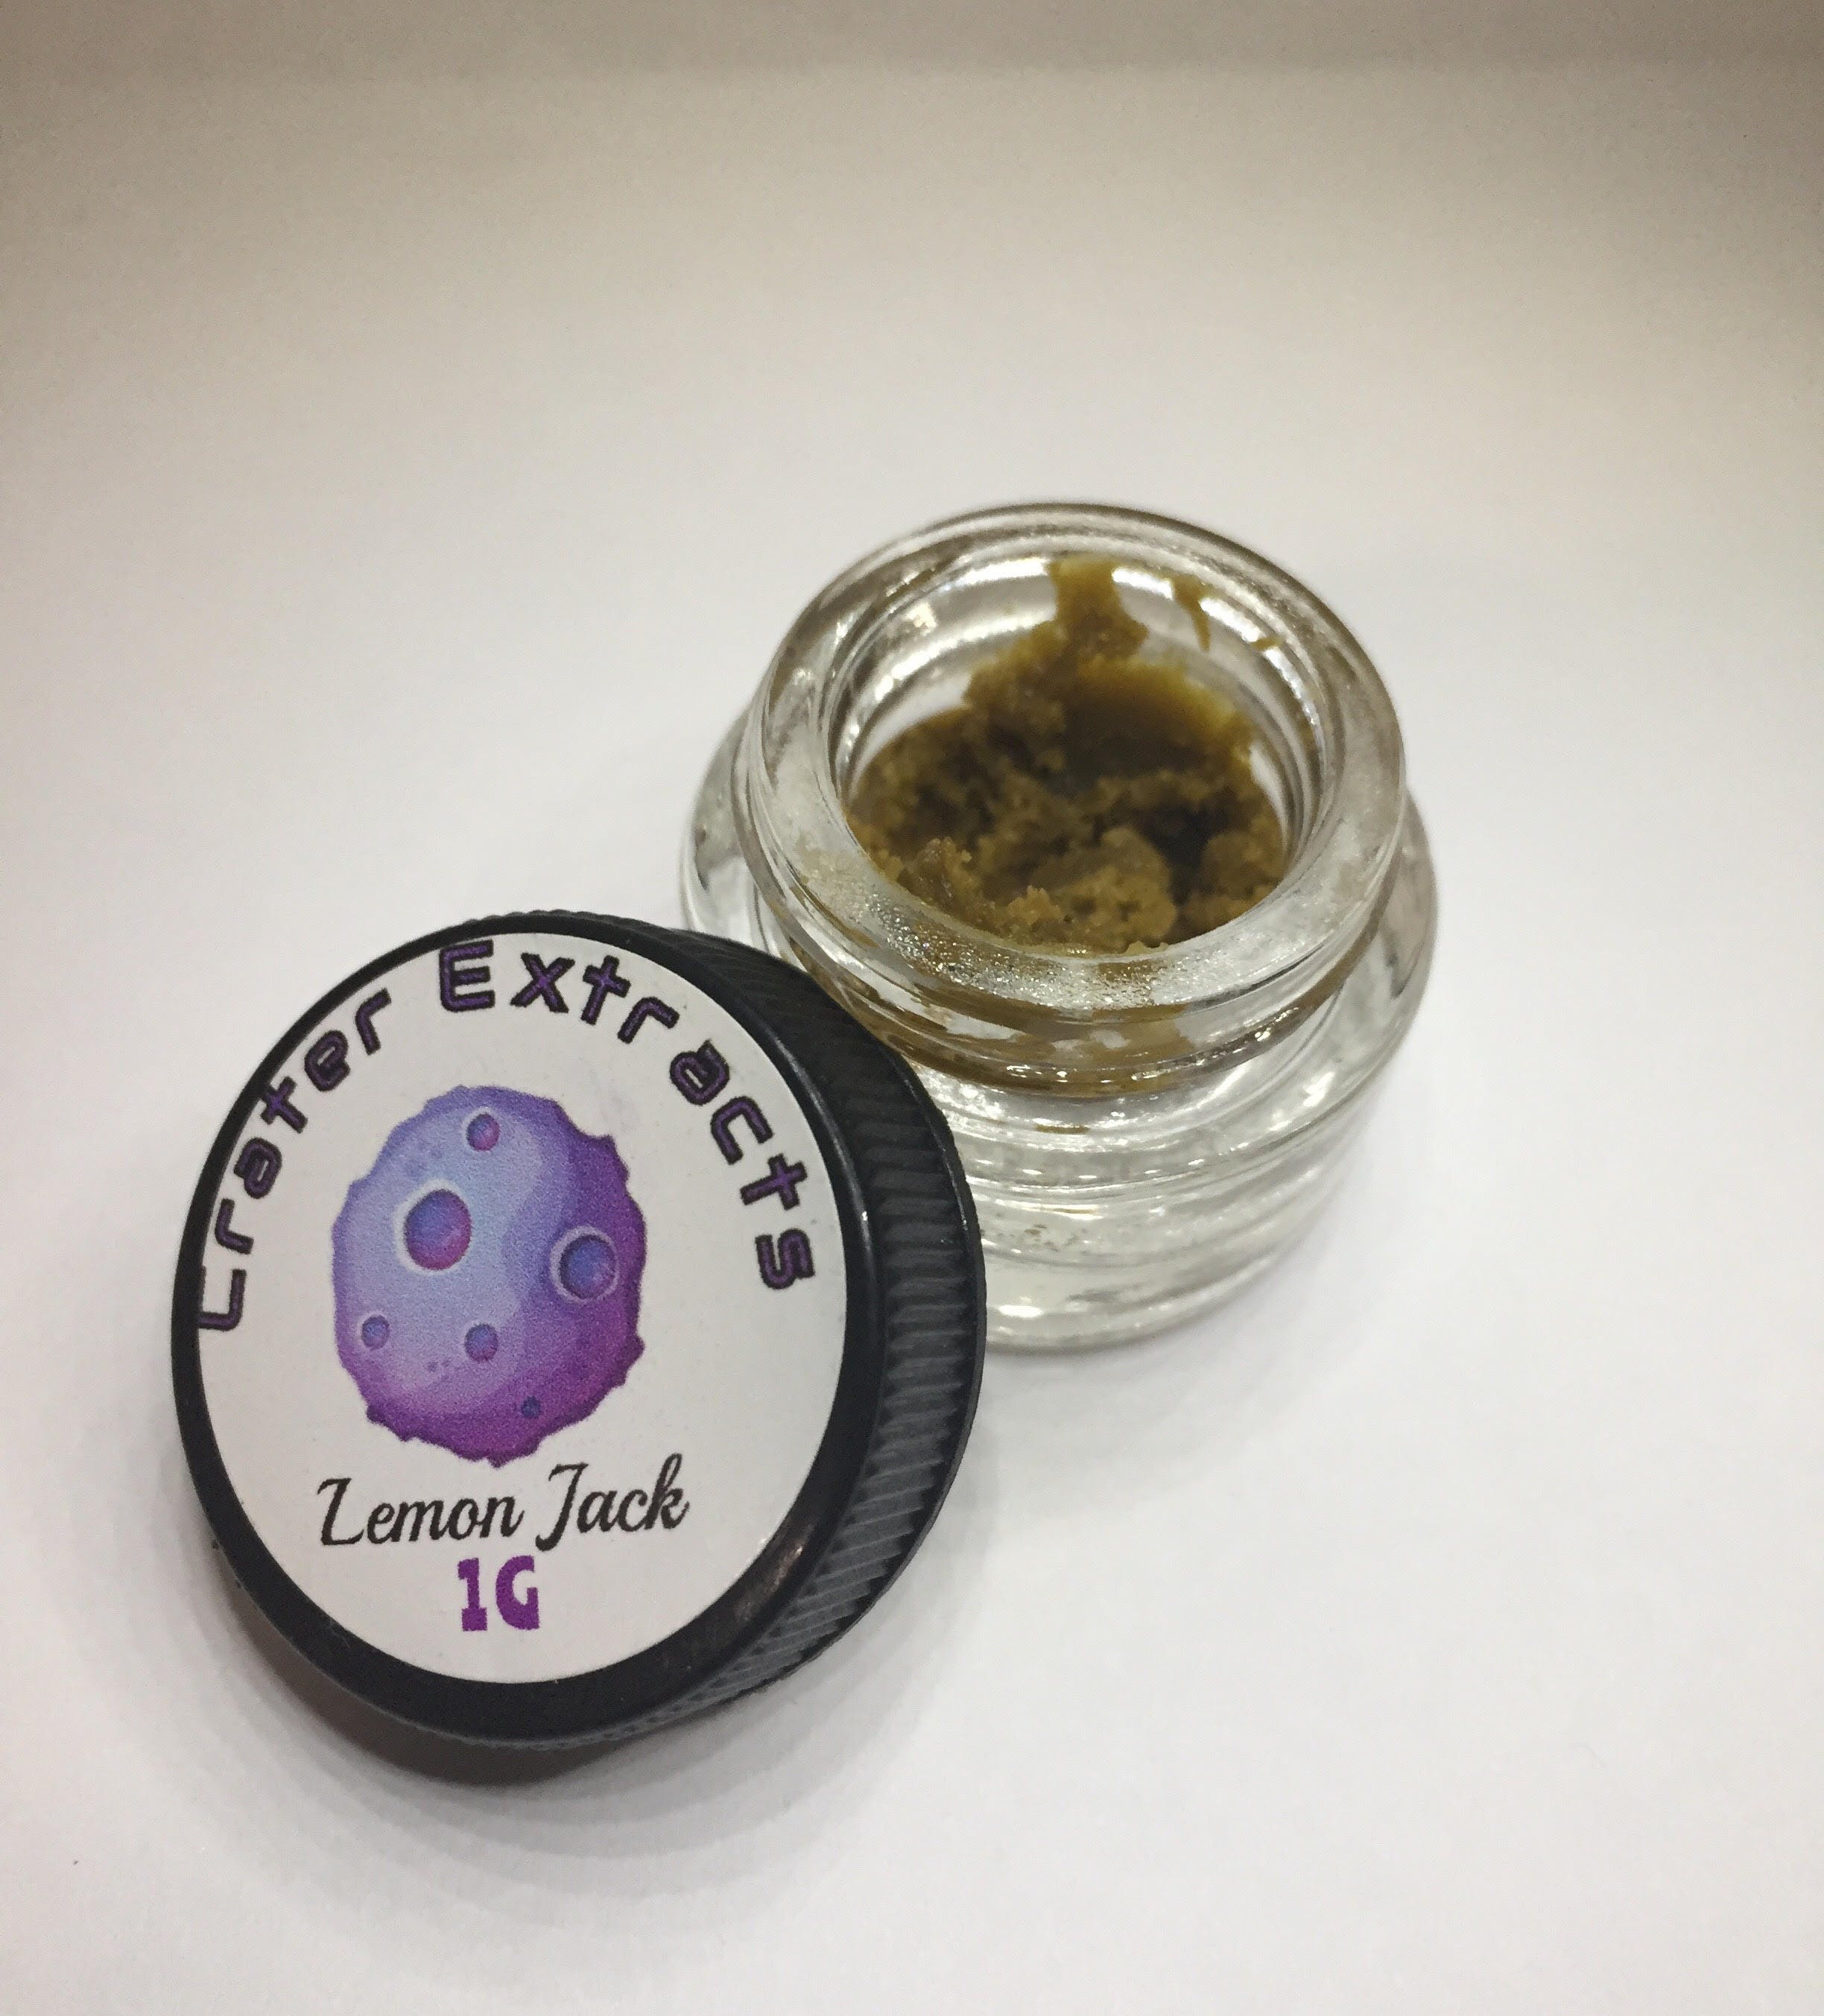 Crater Extracts Lemon Jack